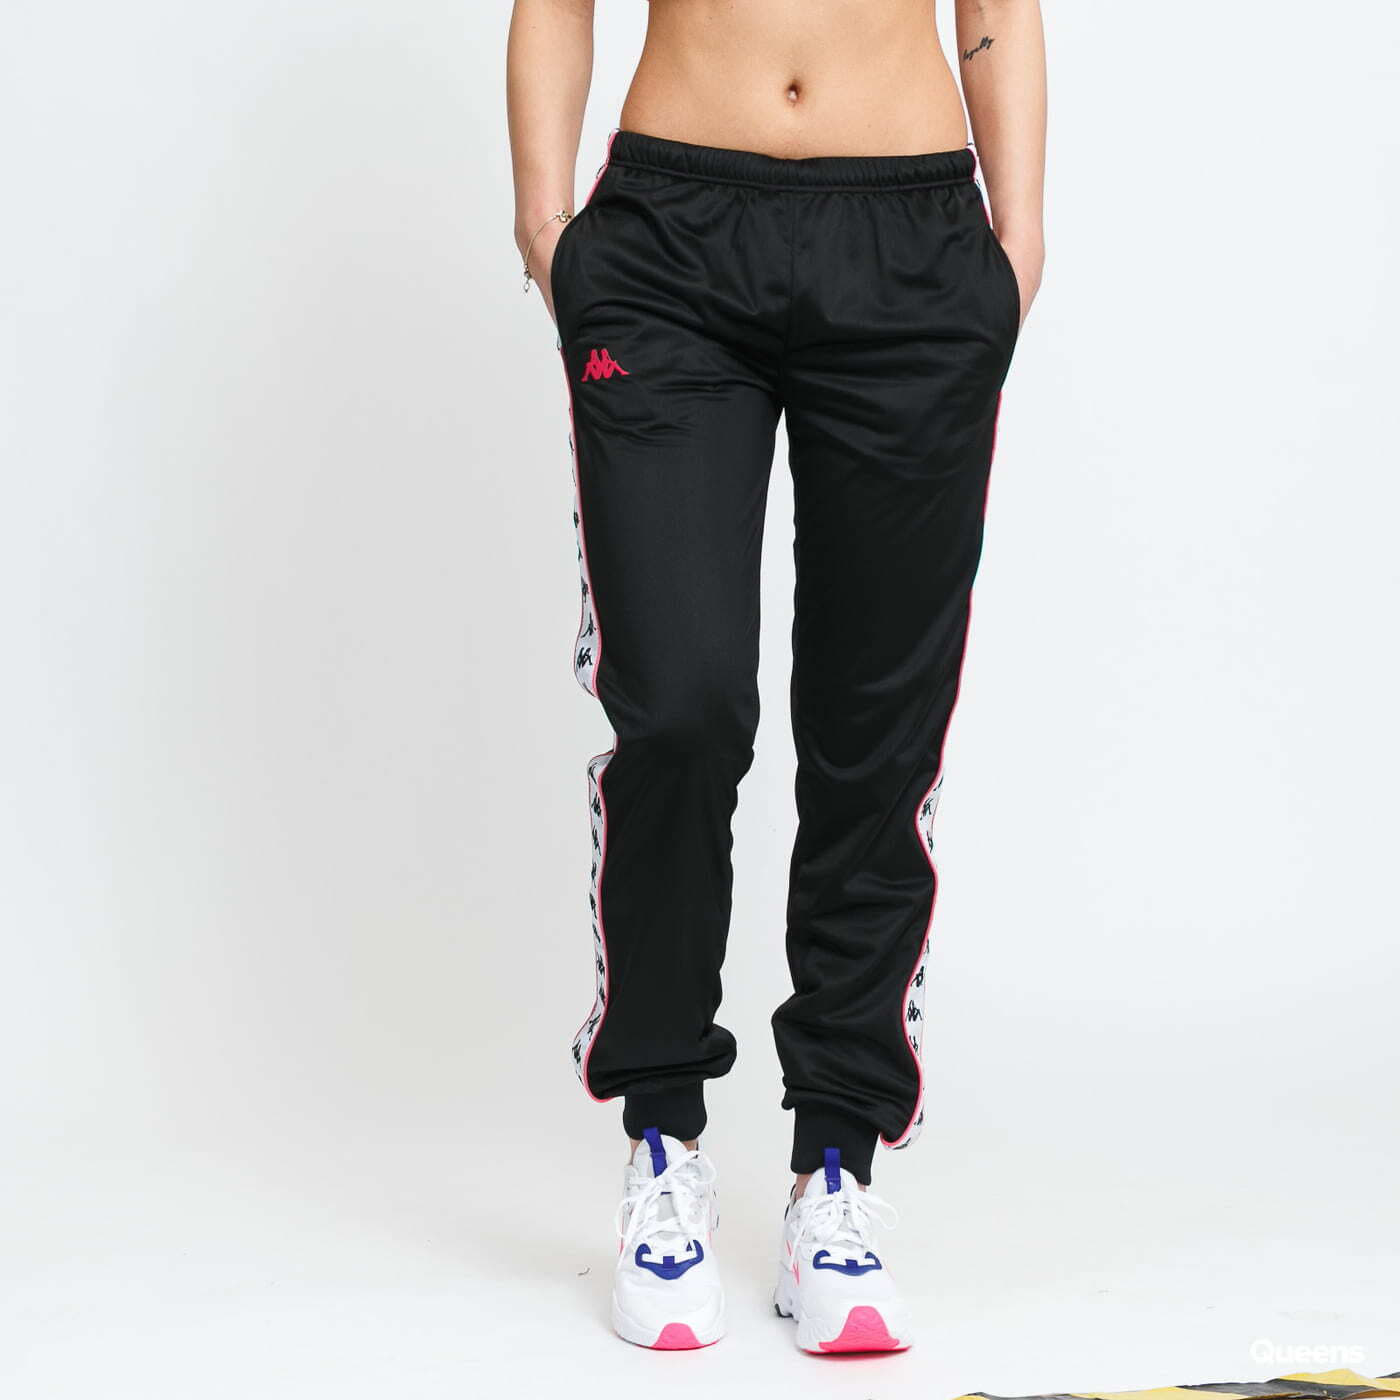 Stay on-trend with these NWT Kappa Track Pants